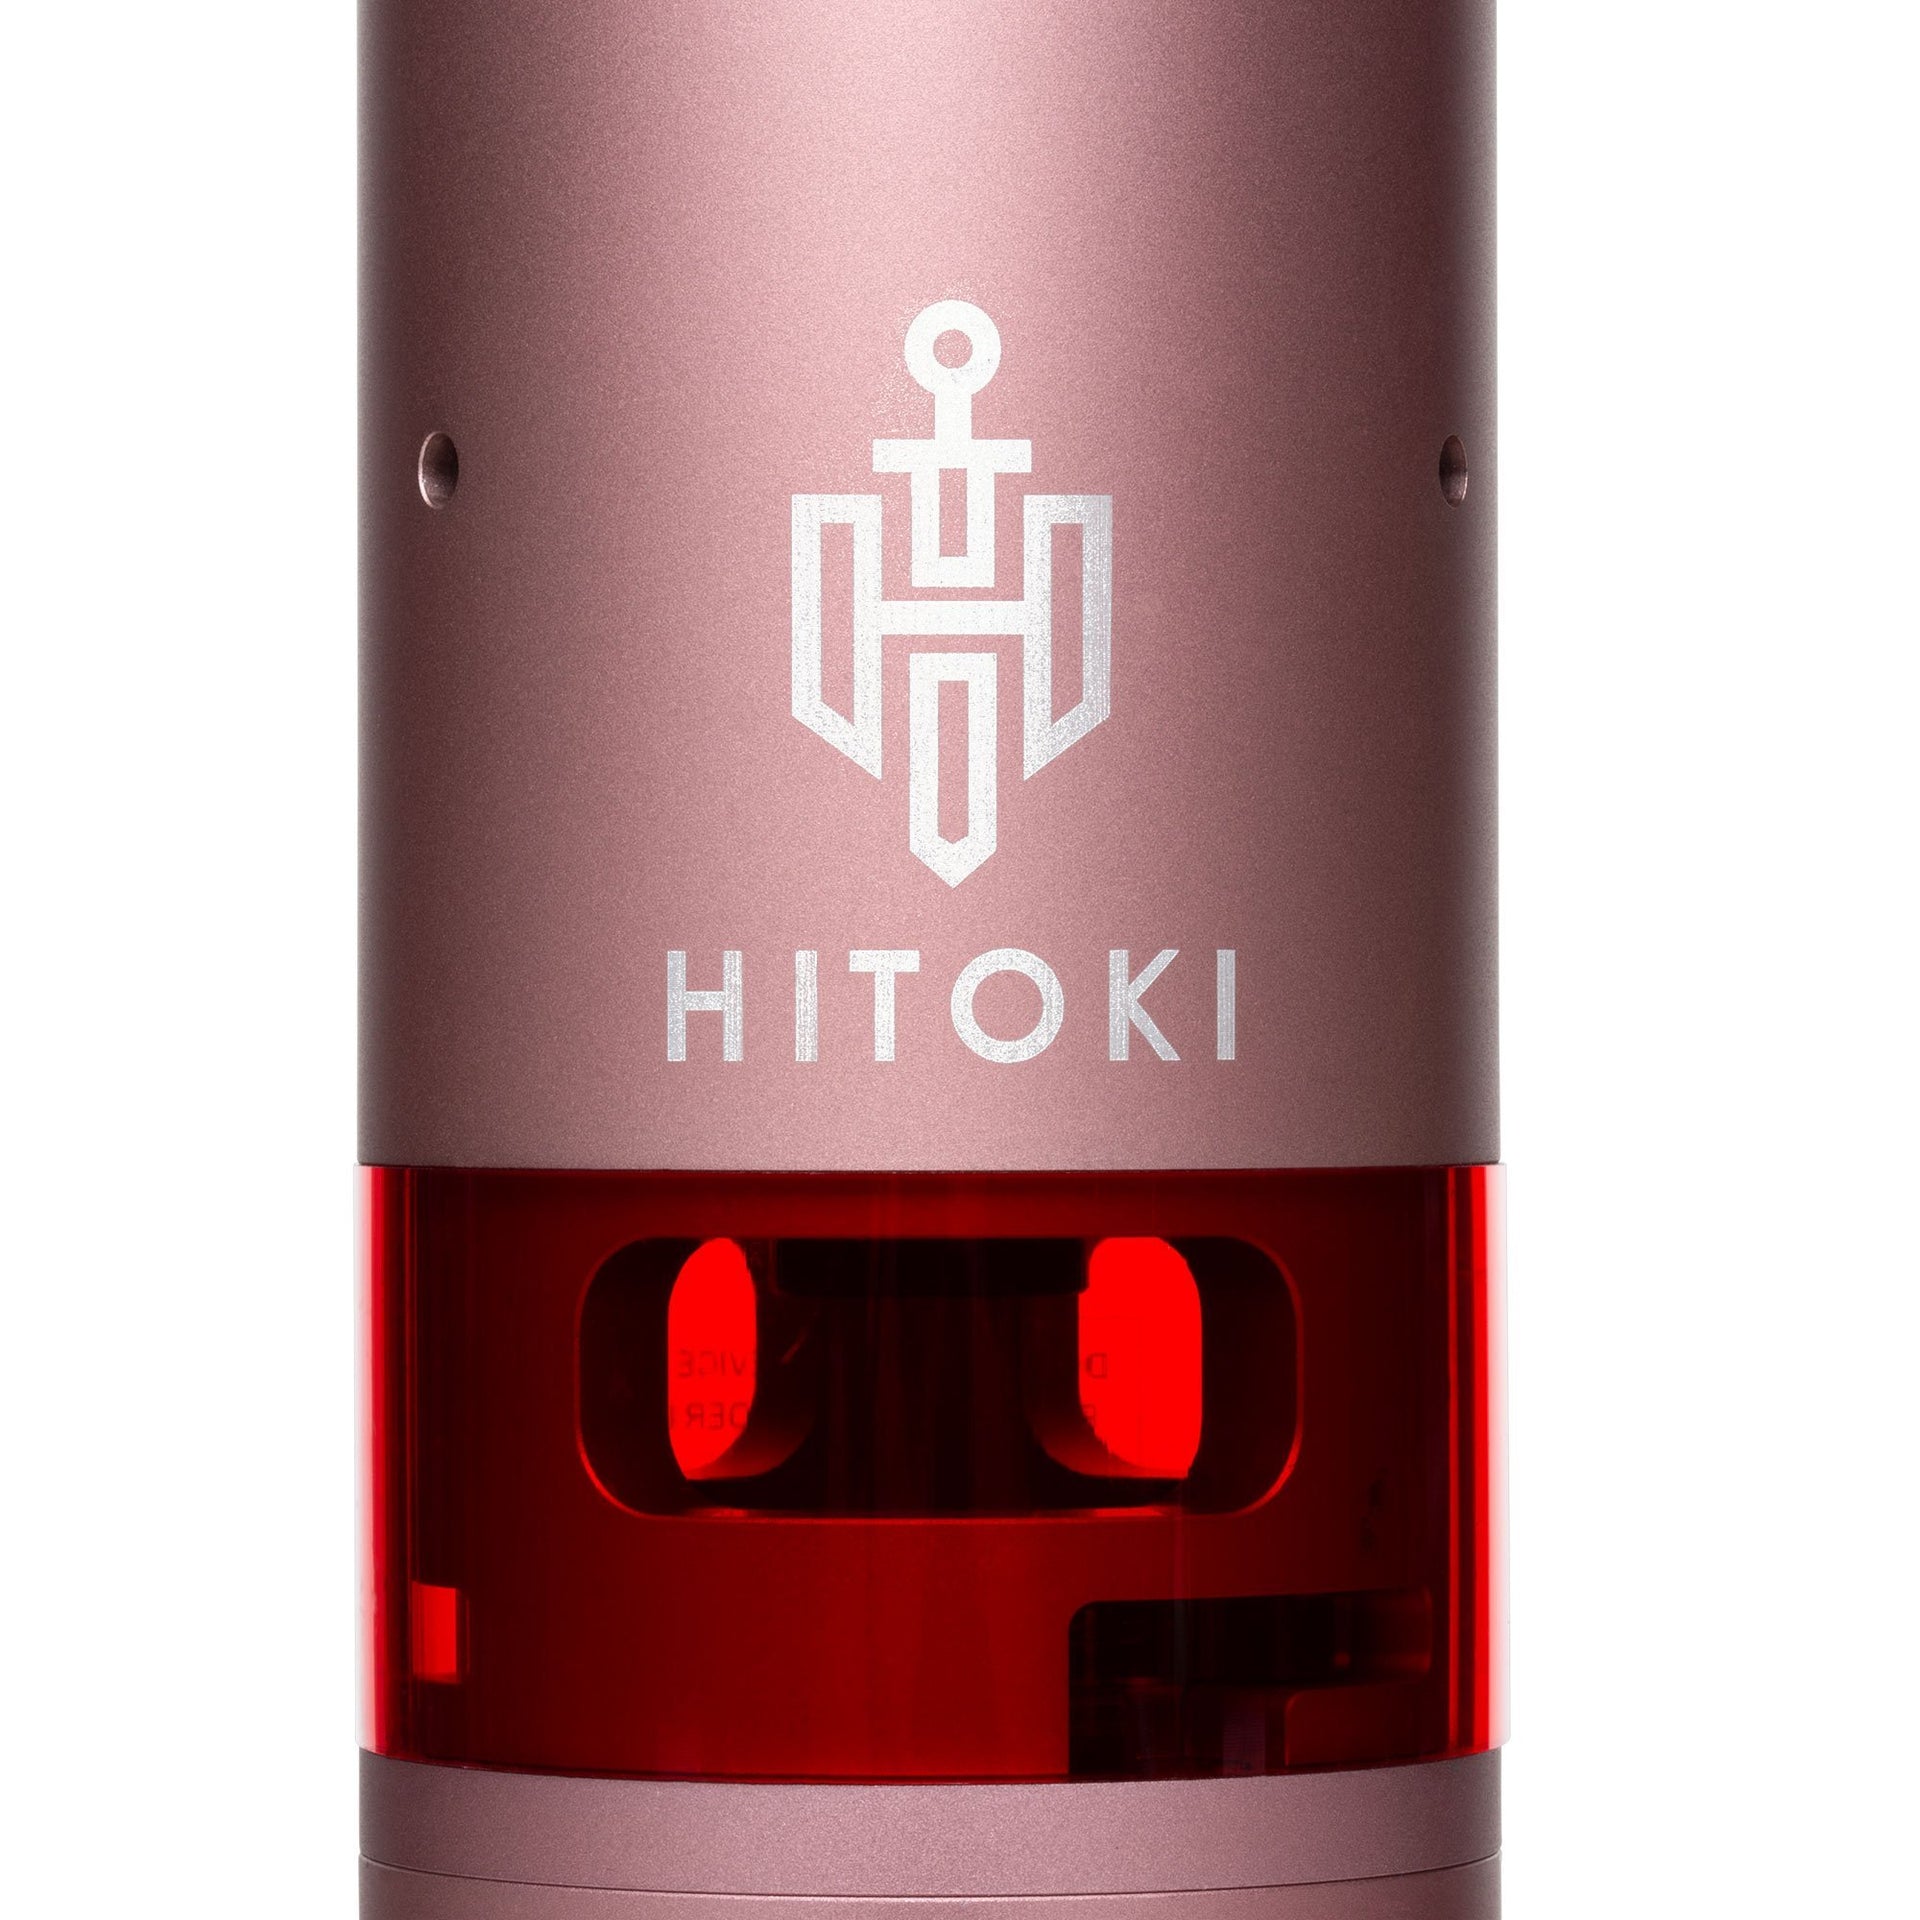 Hitoki Saber review: it's a laser bong - The Verge